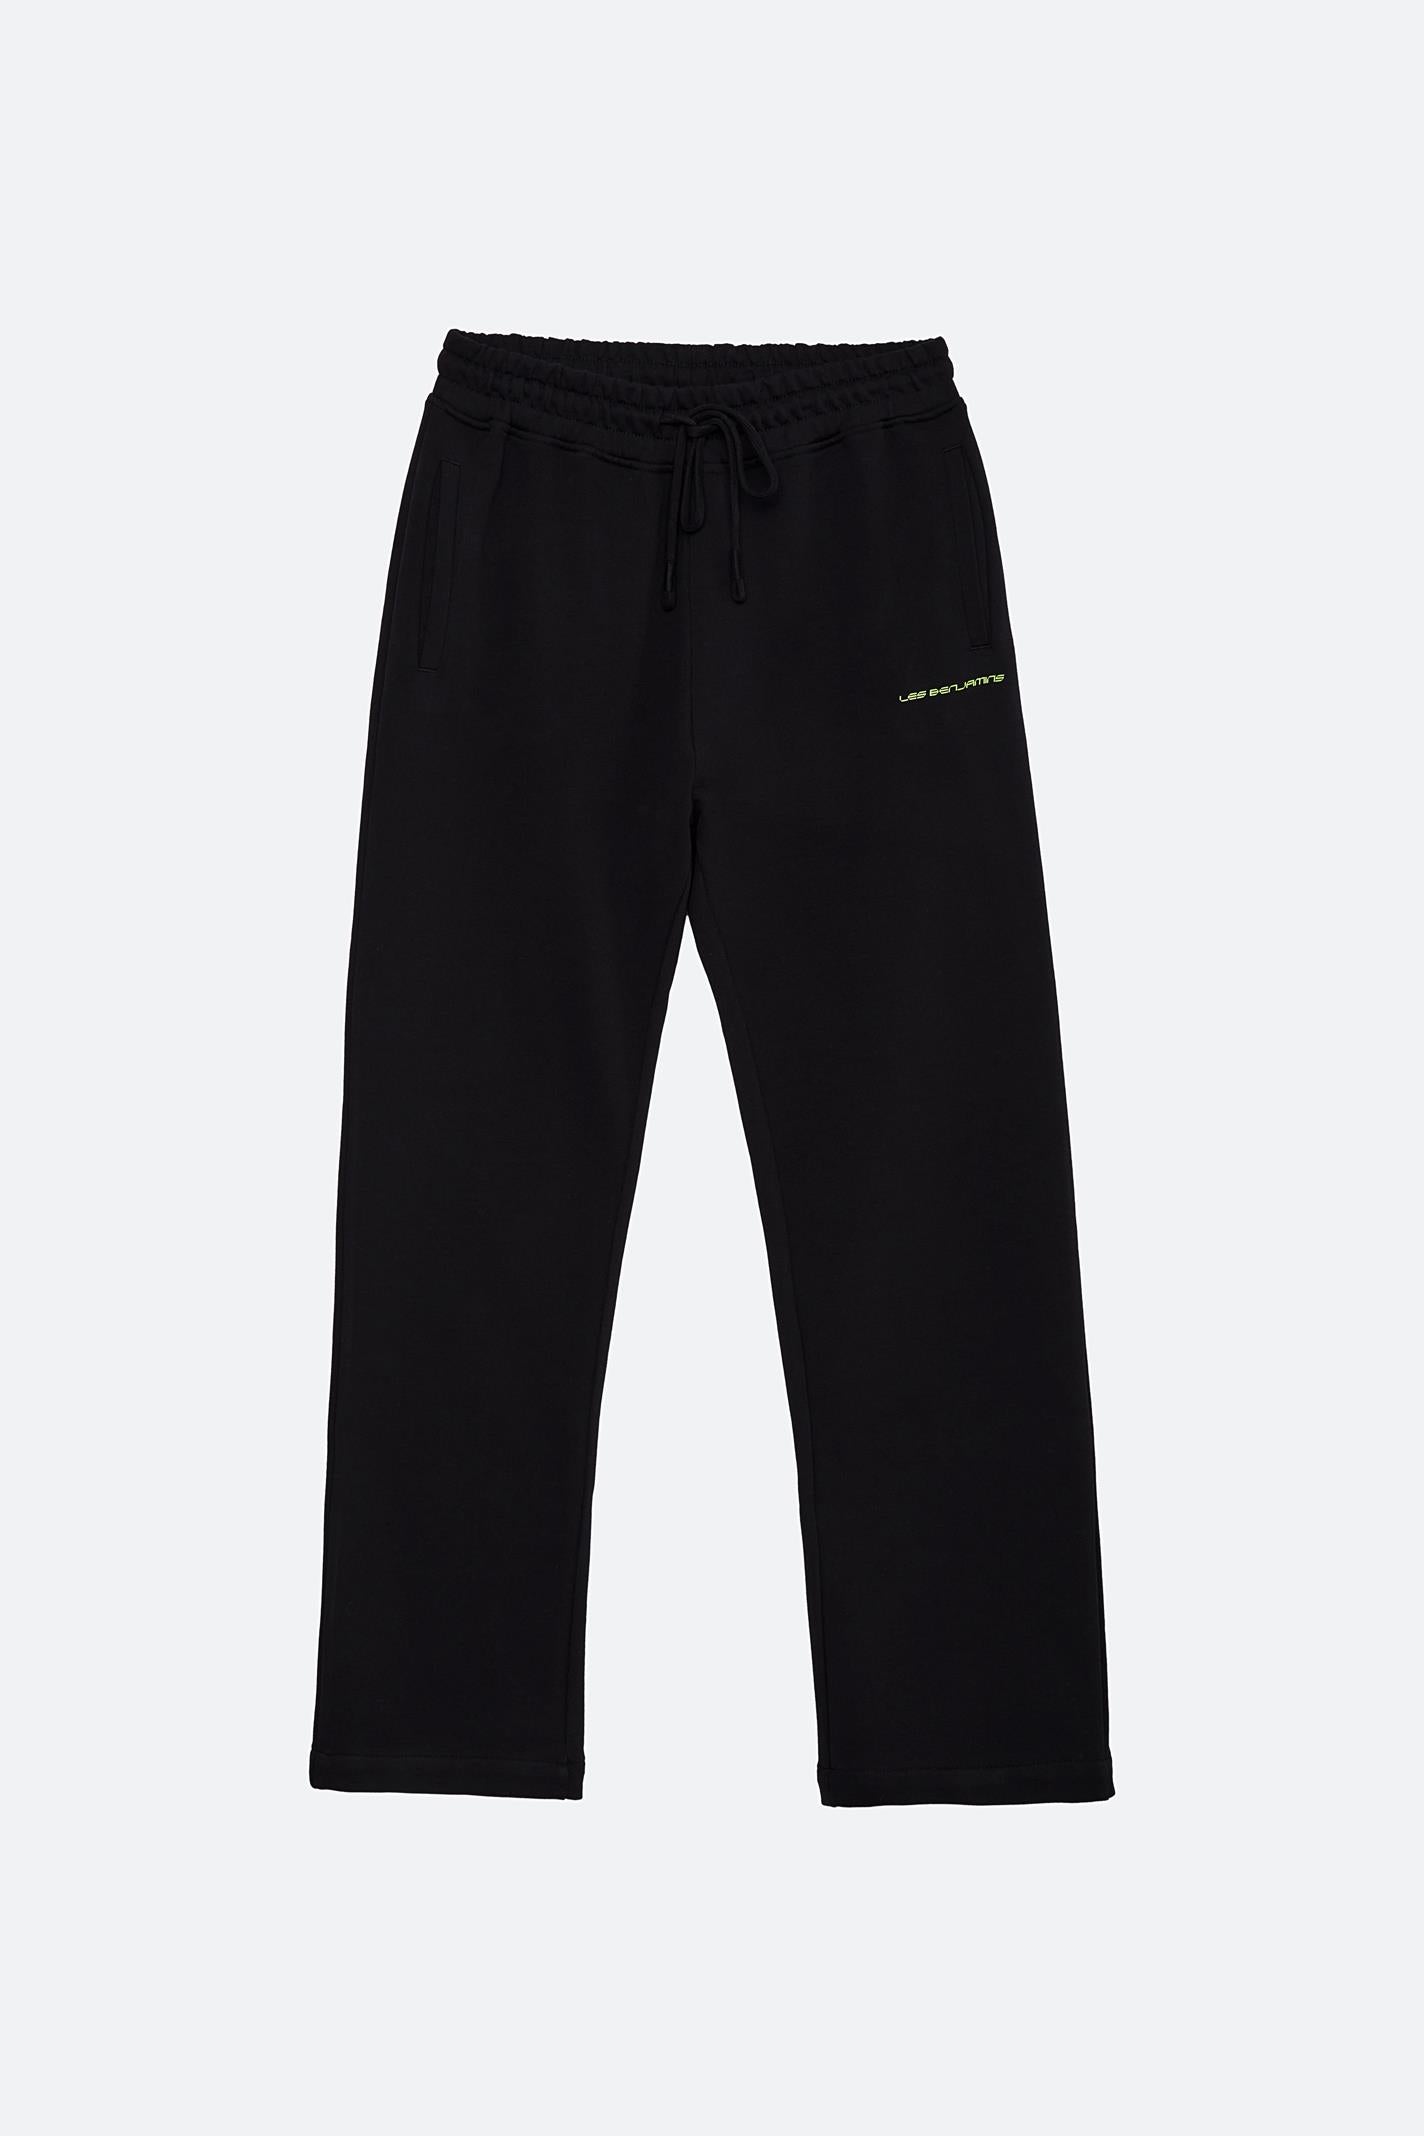 RELAXED SWEATPANT 005 